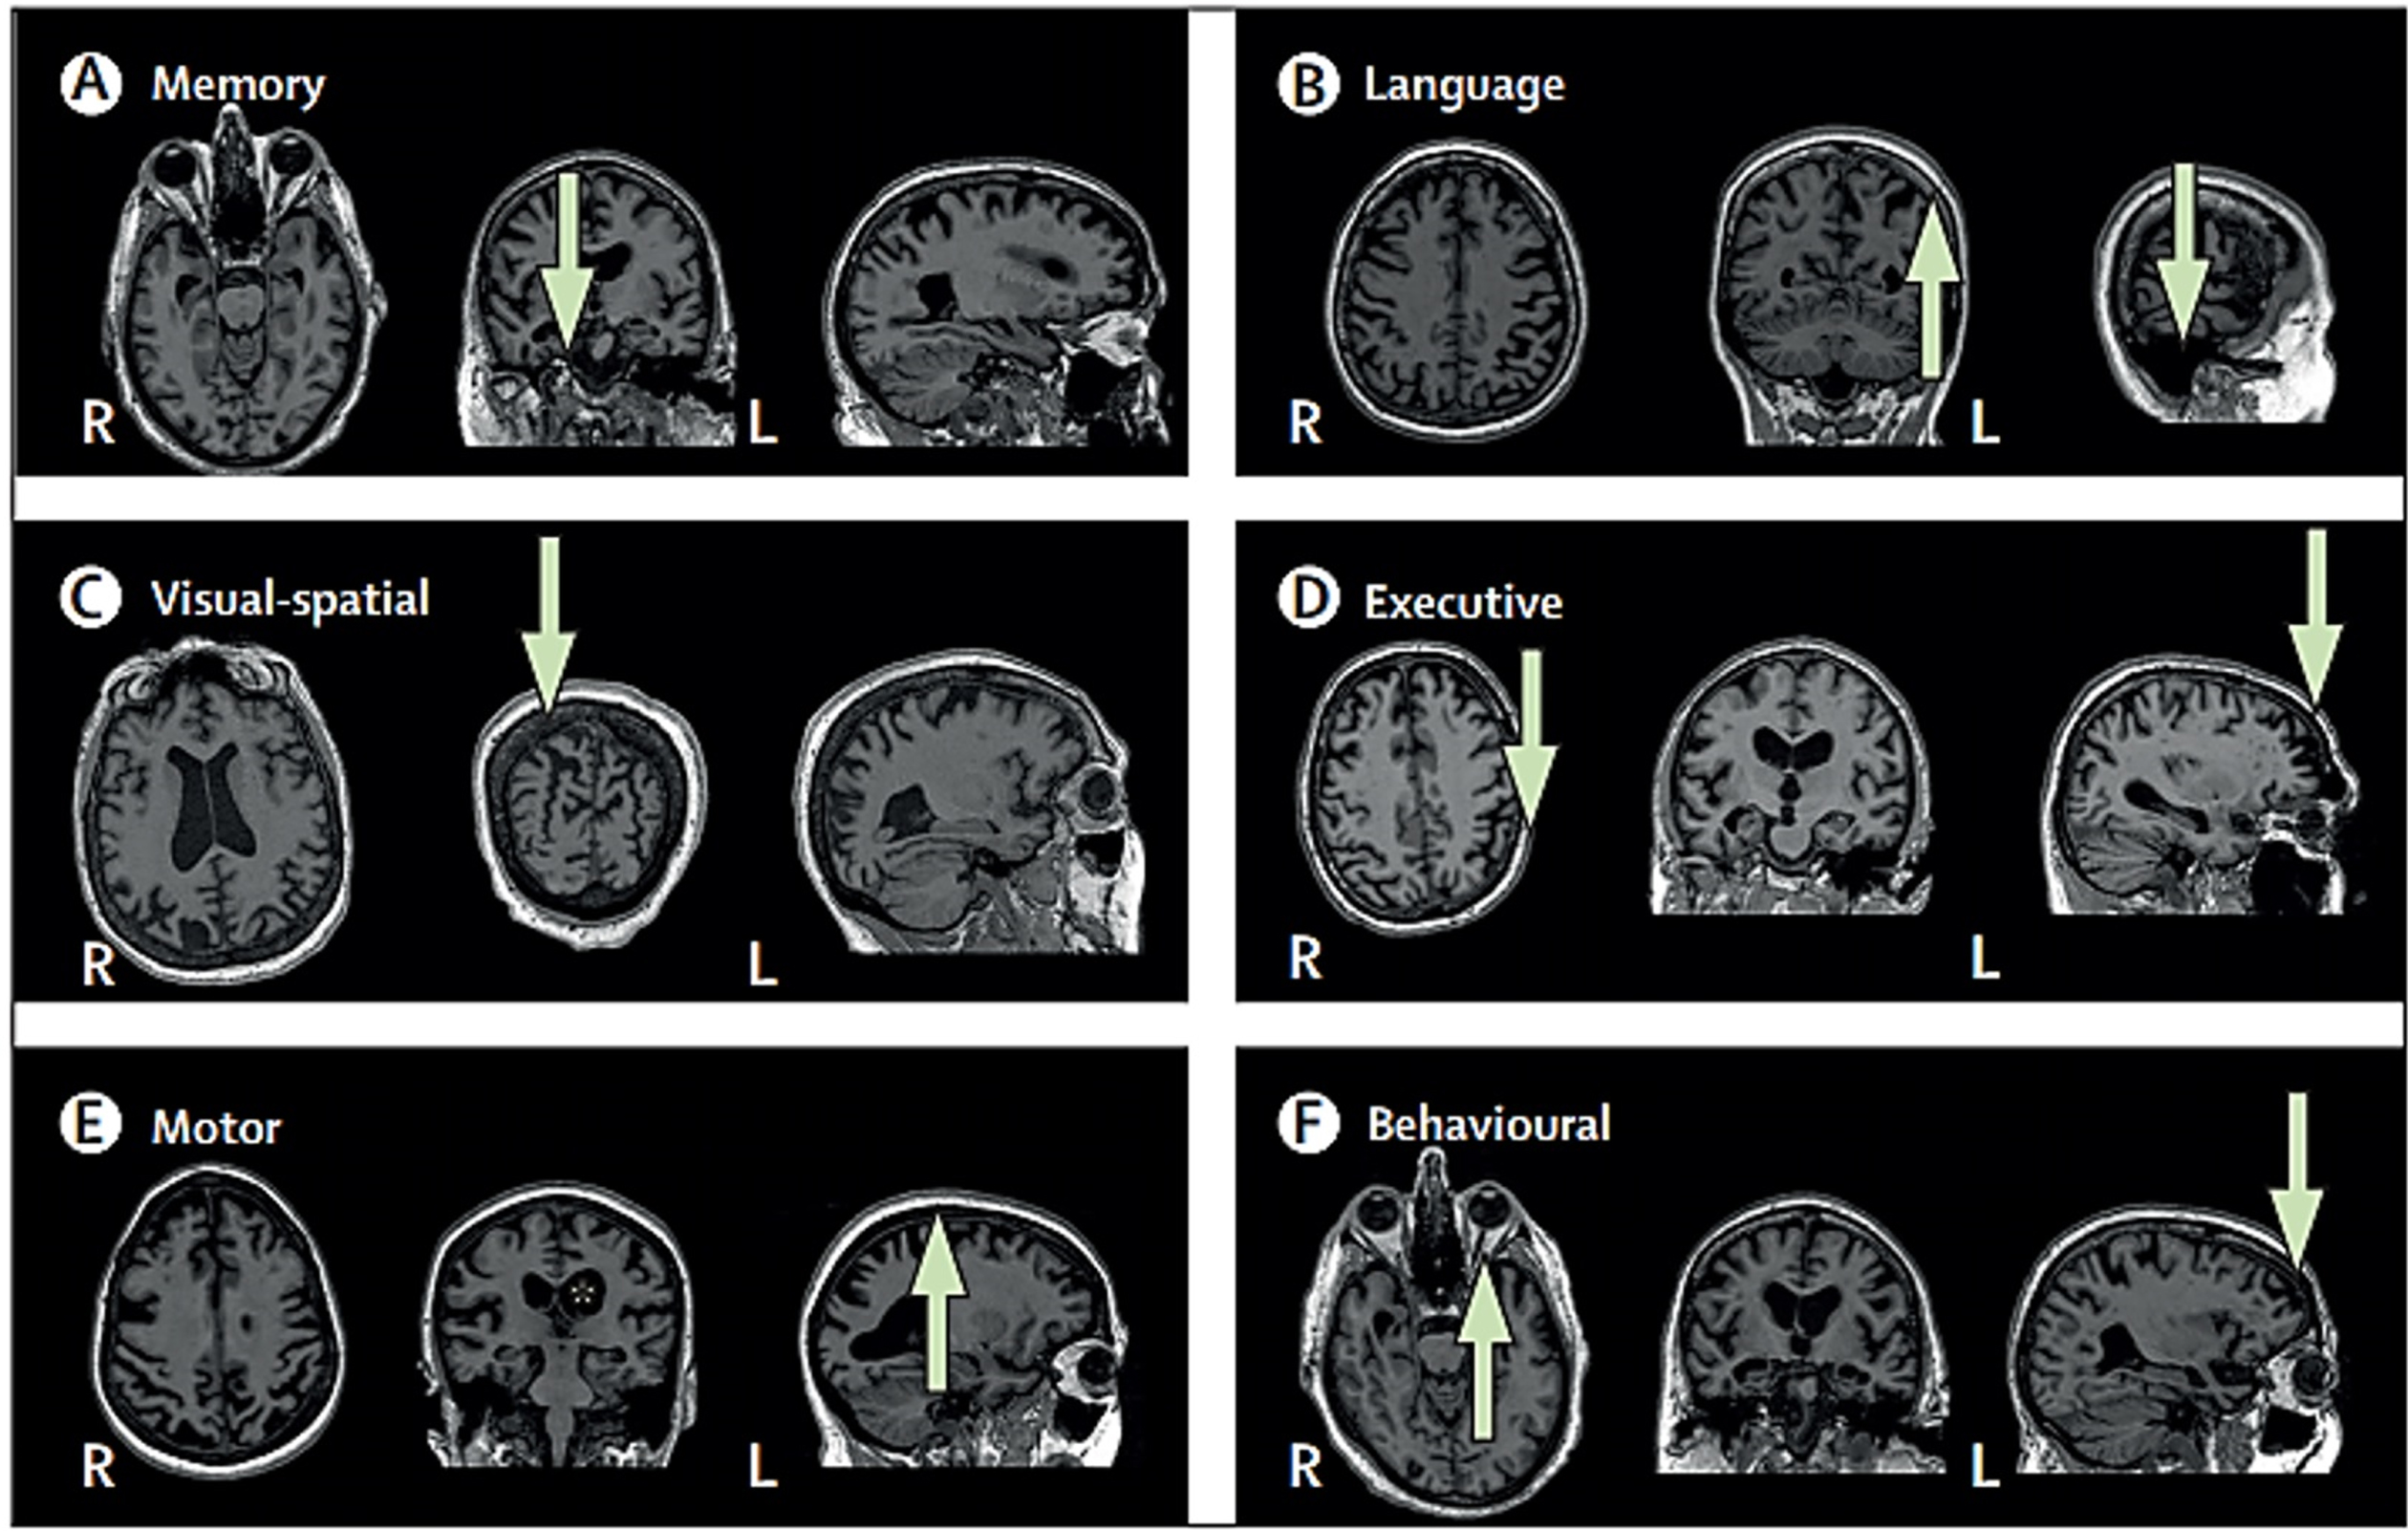 MRI across Alzheimer’s disease phenotypes. A) Memory (typical amnestic); arrow indicates hippocampal atrophy. B) Language (logopenic variant primary progressive aphasia); arrows highlight left temporal-parietal atrophy. C) Visual-spatial (posterior cortical atrophy); arrow indicates parieto-occipital atrophy. D) Executive (also known as dysexecutive); arrows indicate frontoparietal atrophy. E) Motor (corticobasal syndrome); asterisk highlights greater left than right hemisphere atrophy, and arrow indicates atrophy around the motor cortex. F) Behavioral; arrows point to greater temporal than frontal atrophy. R, right; L, left. Reprinted from Lancet Neurology, Vol 20, Graff-Radford et al., New insights into atypical Alzheimer’s disease in the era of biomarkers, 222–234, 2021 [69], with permission from Elsevier.